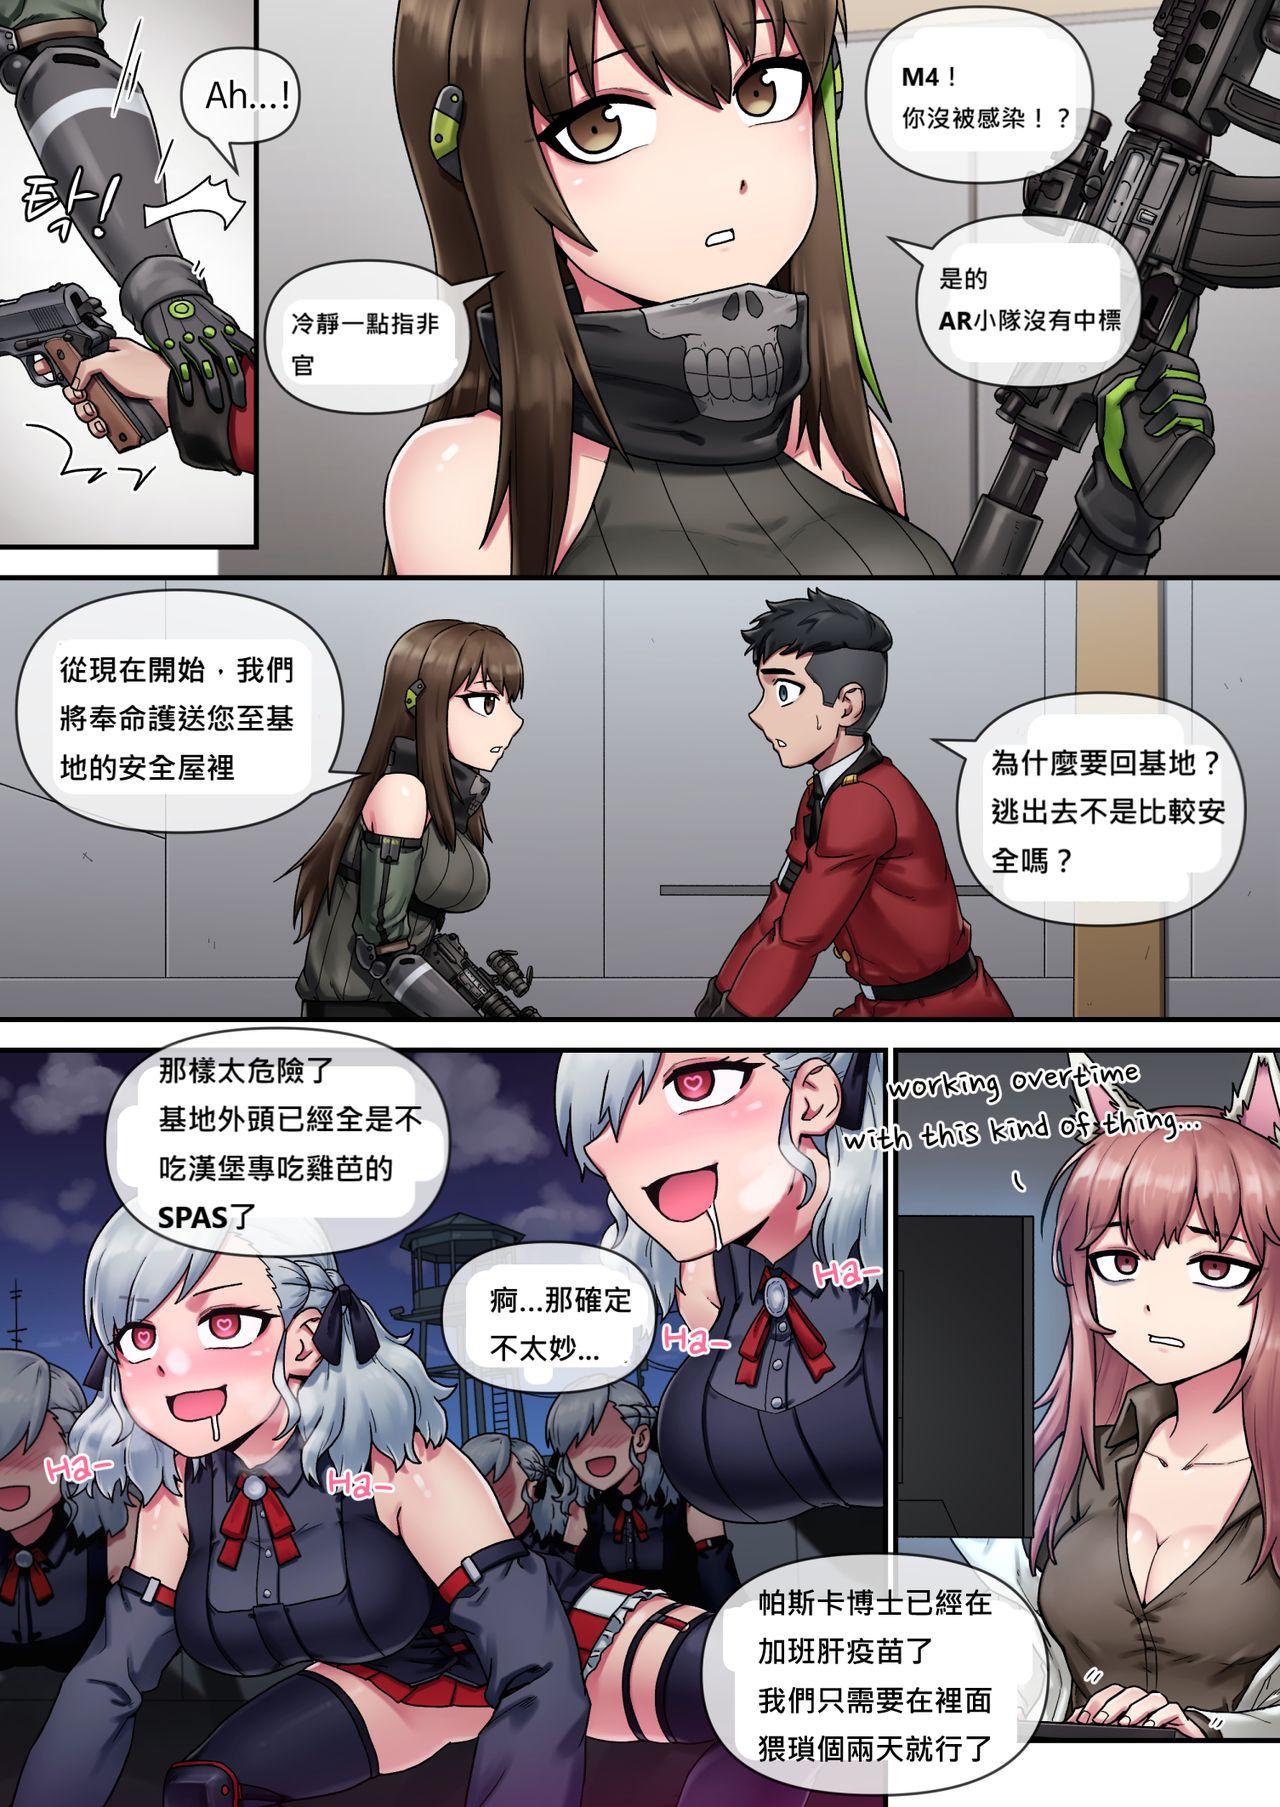 Whatsapp My Only Princess - Girls frontline Linda - Page 4